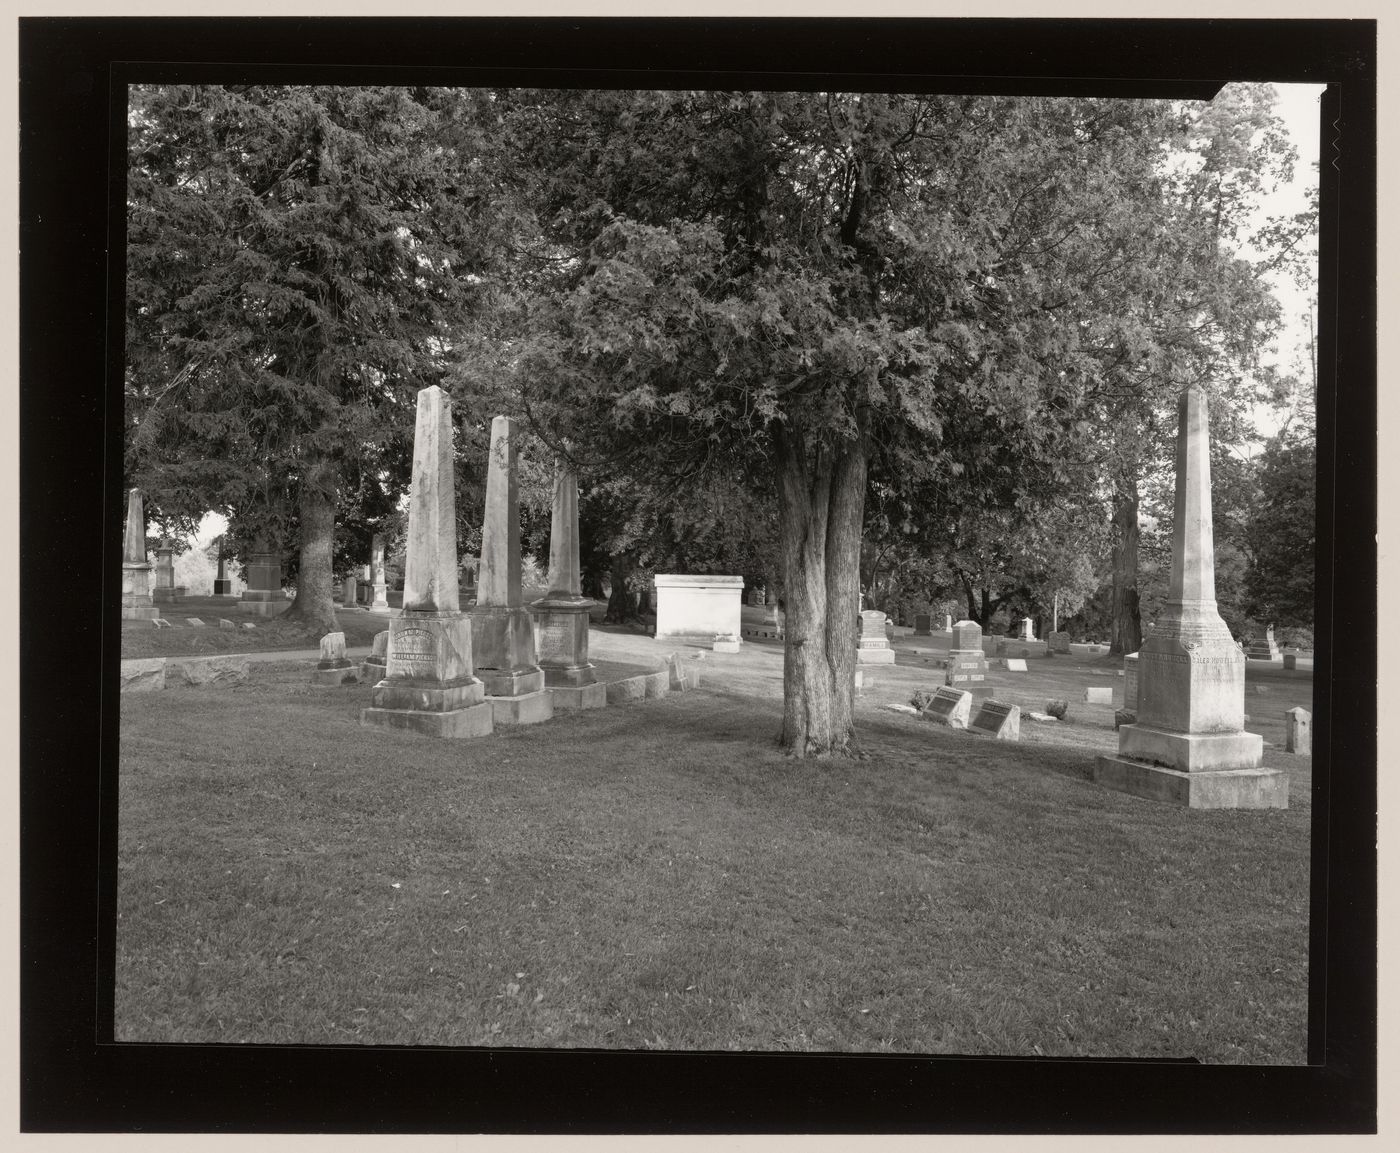 View of monuments in trees, Hillside Cemetery, Middletown, New York